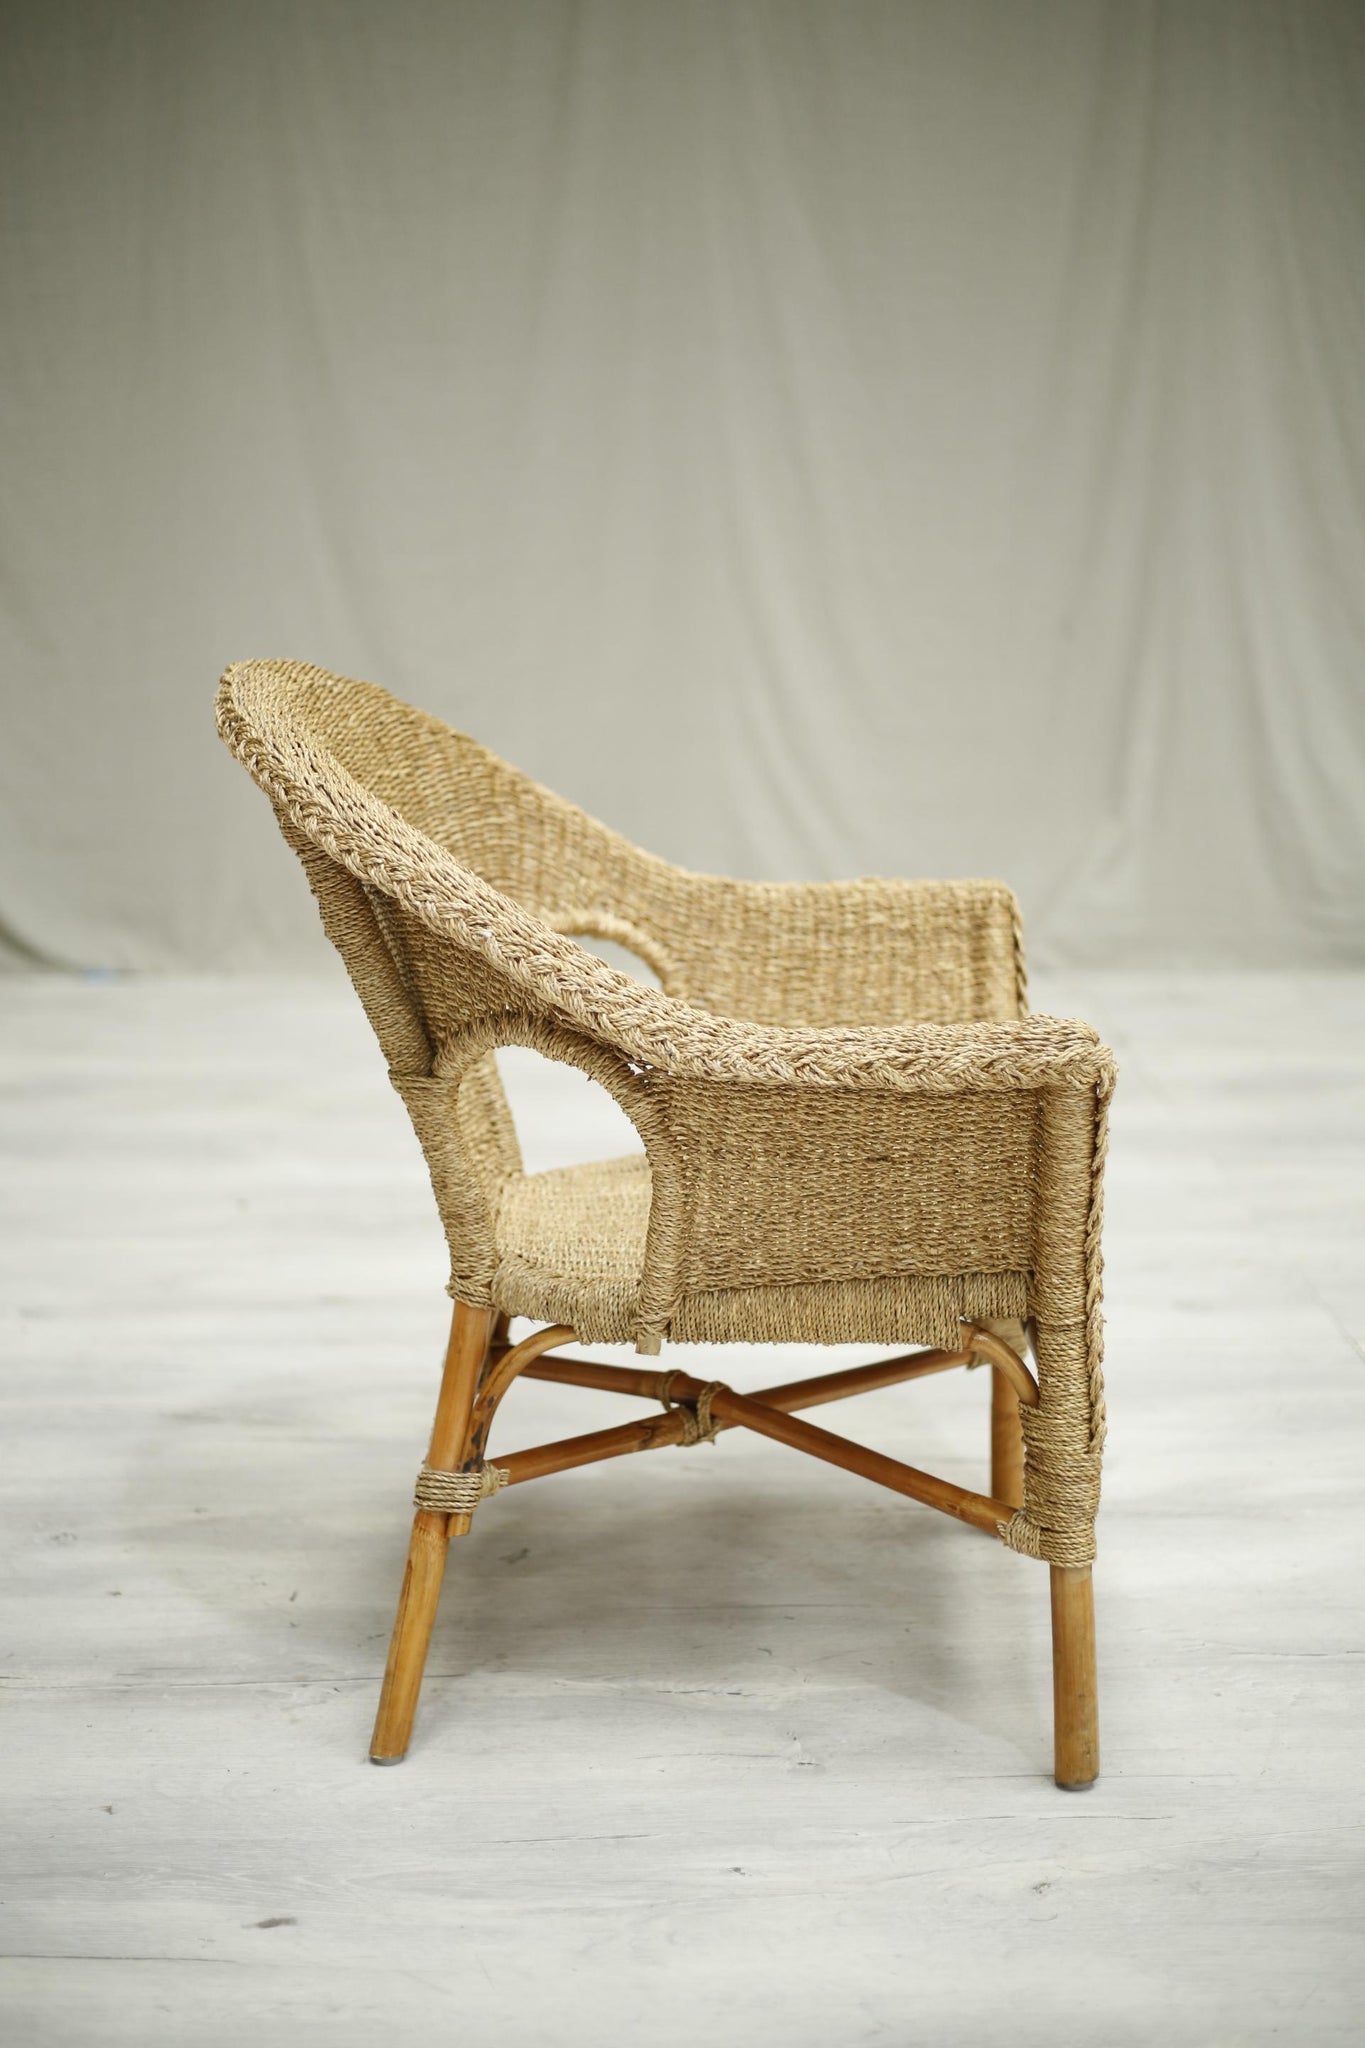 Vintage rope seated armchair with jute side table